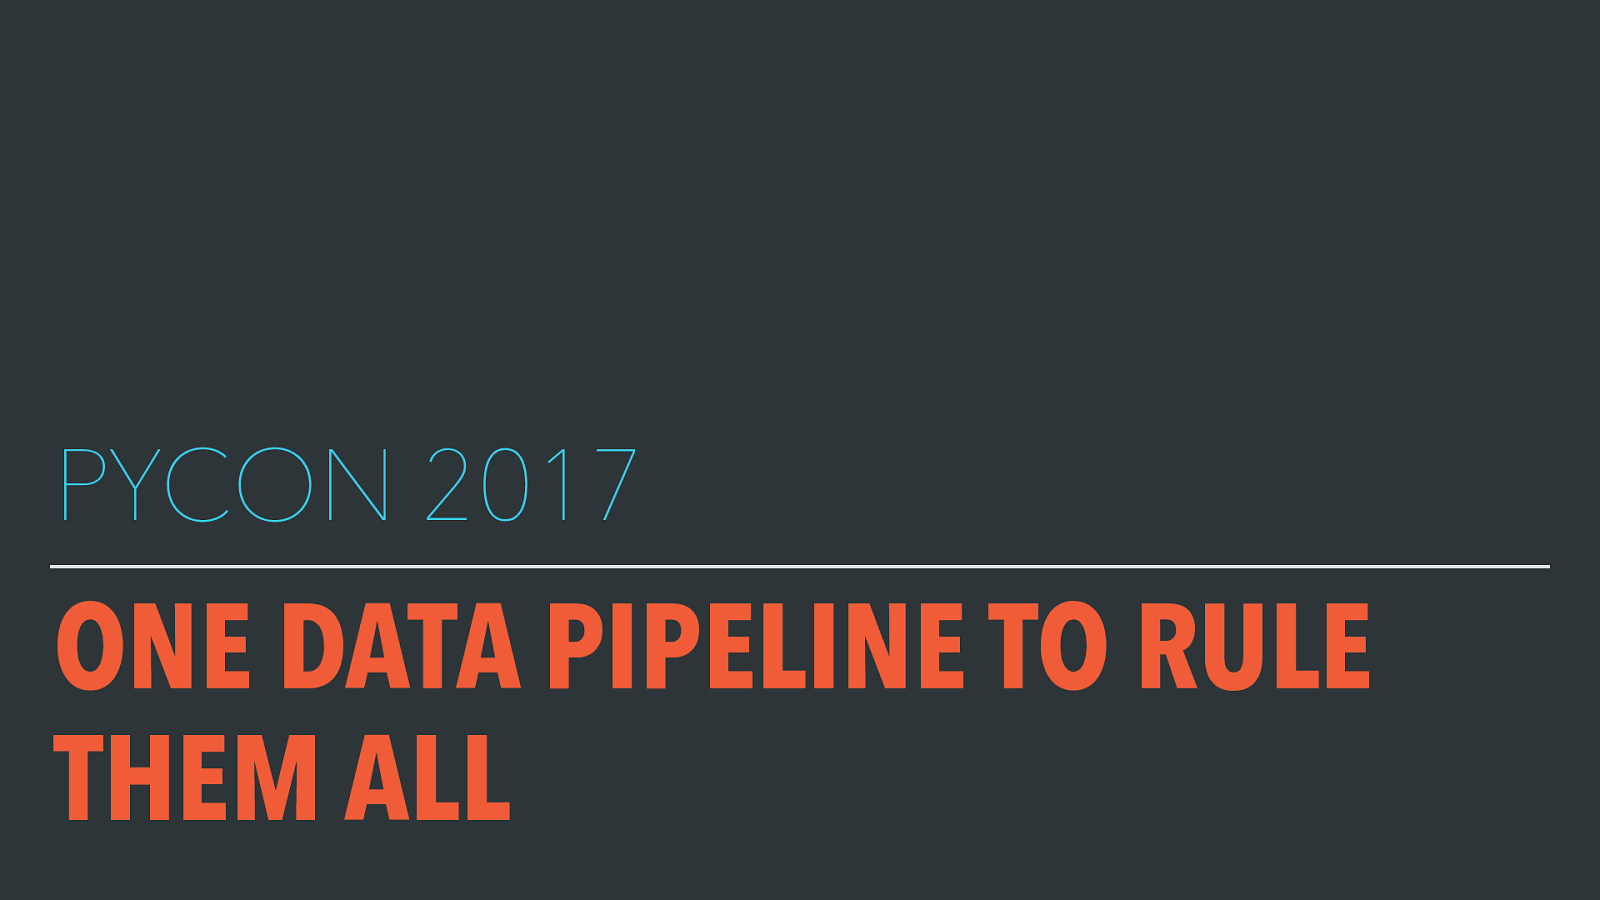 One Data Pipeline to Rule Them All